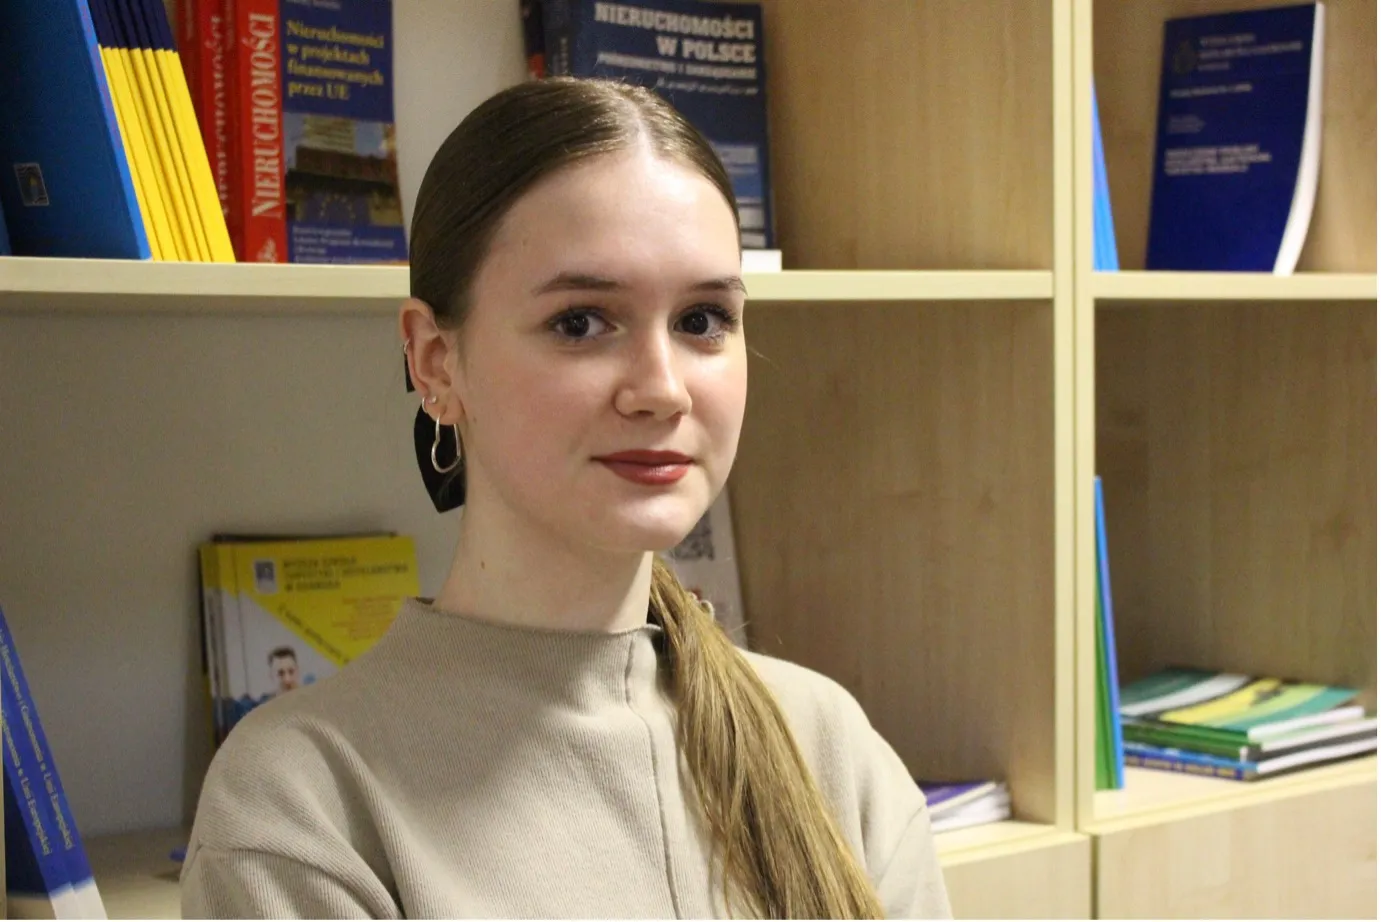 Portrait of a young woman, with bookshelves in the background.